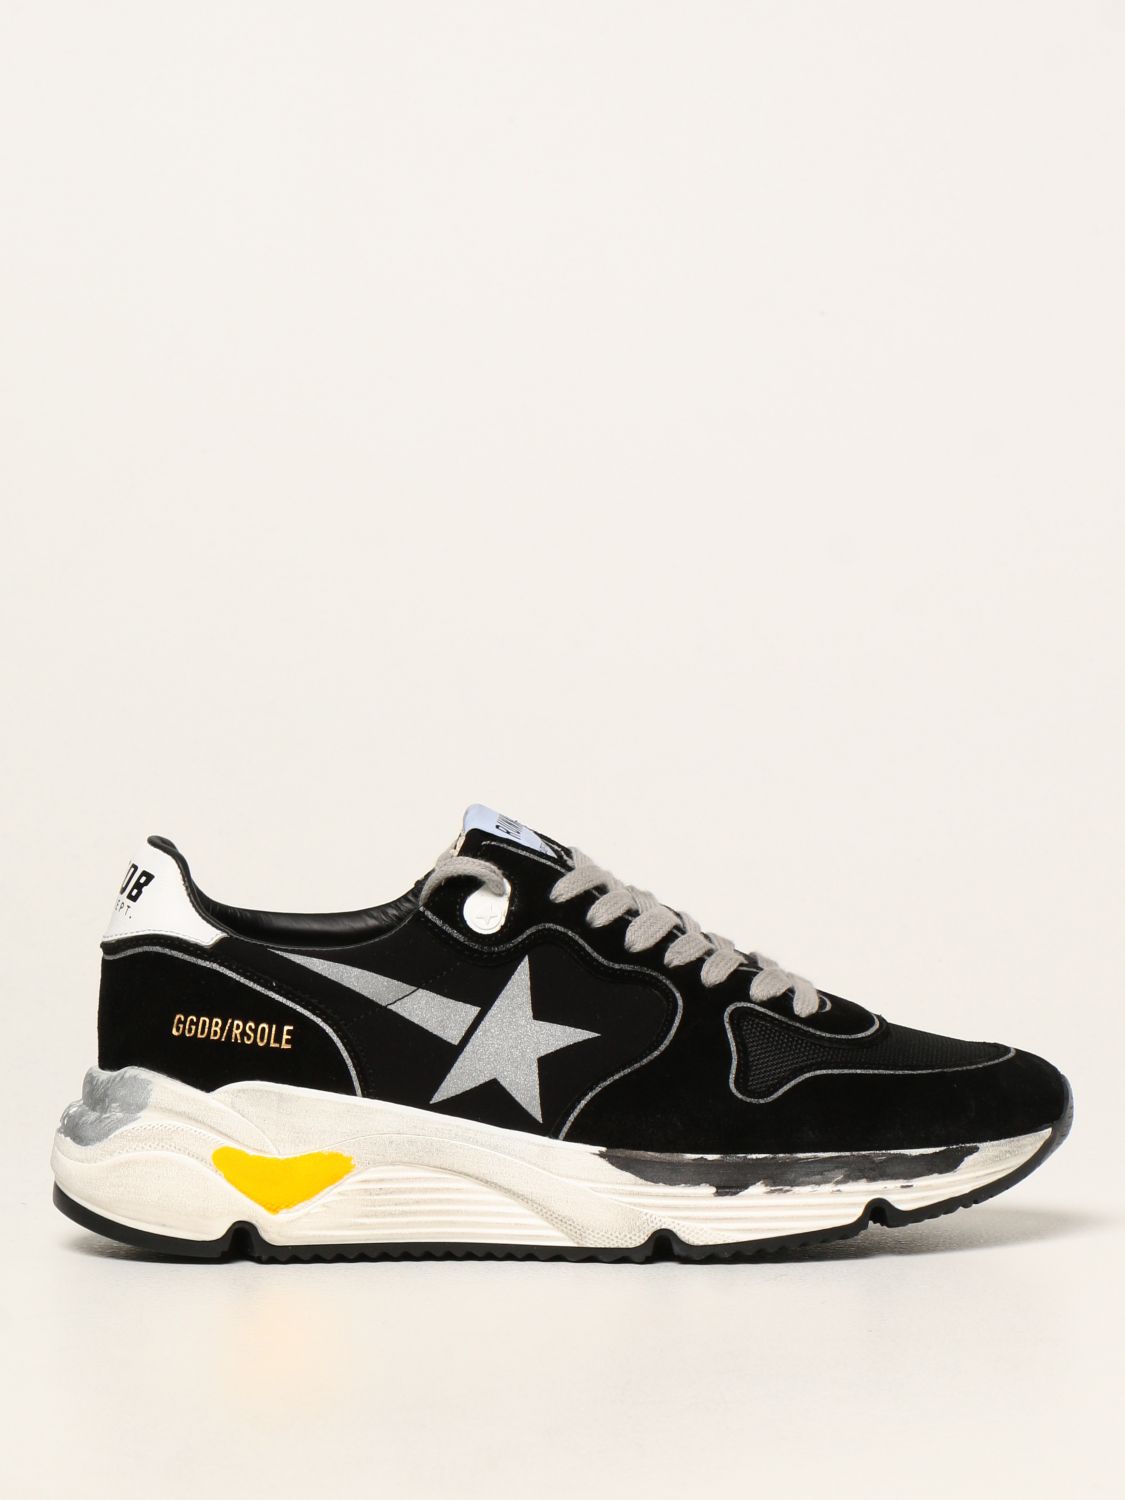 GOLDEN Running Sole sneakers suede and lycra | Sneakers Golden Goose Men Black | Sneakers Golden Goose GIGLIO.COM